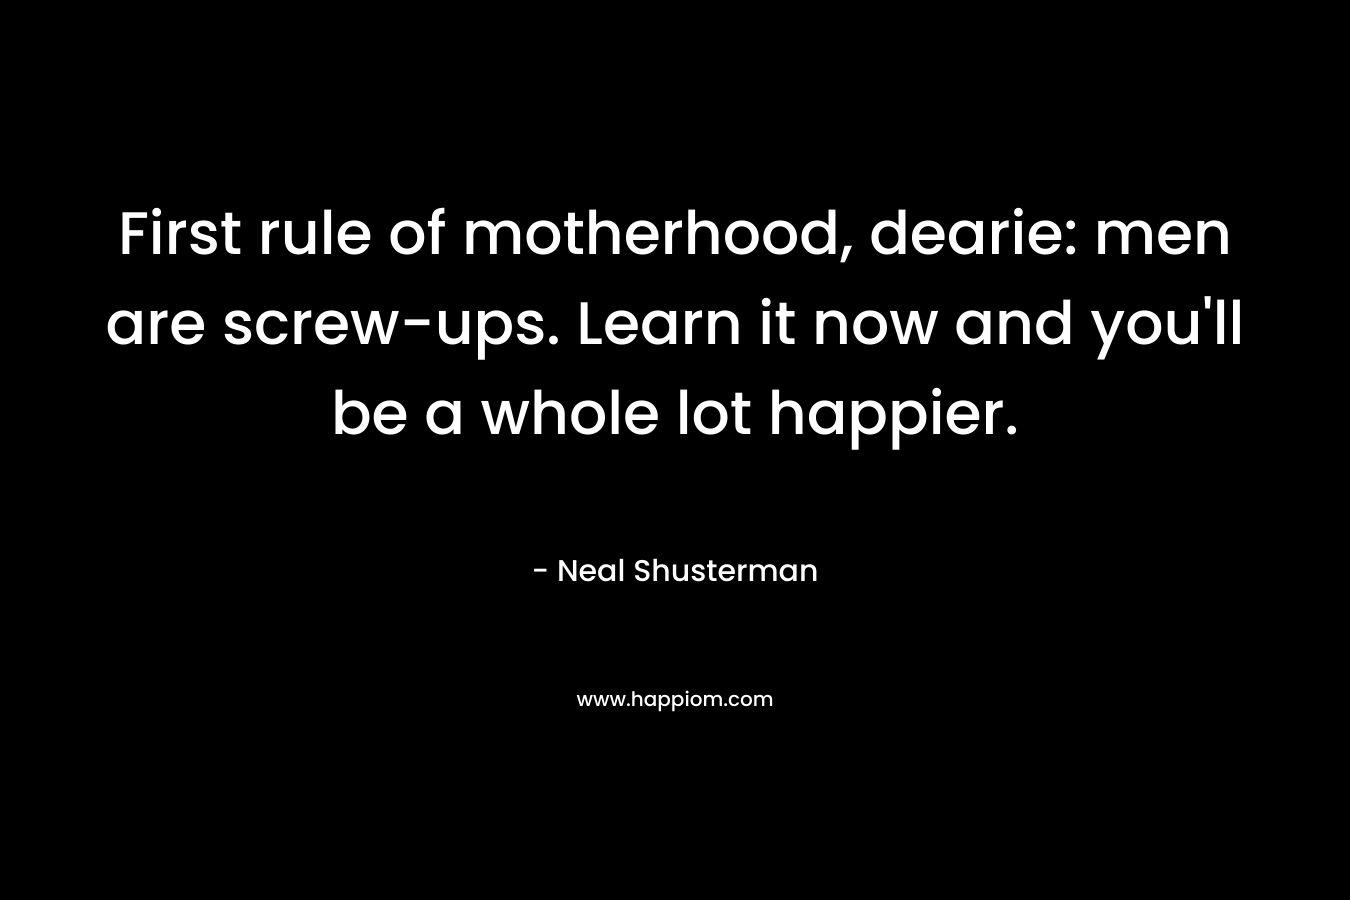 First rule of motherhood, dearie: men are screw-ups. Learn it now and you'll be a whole lot happier.